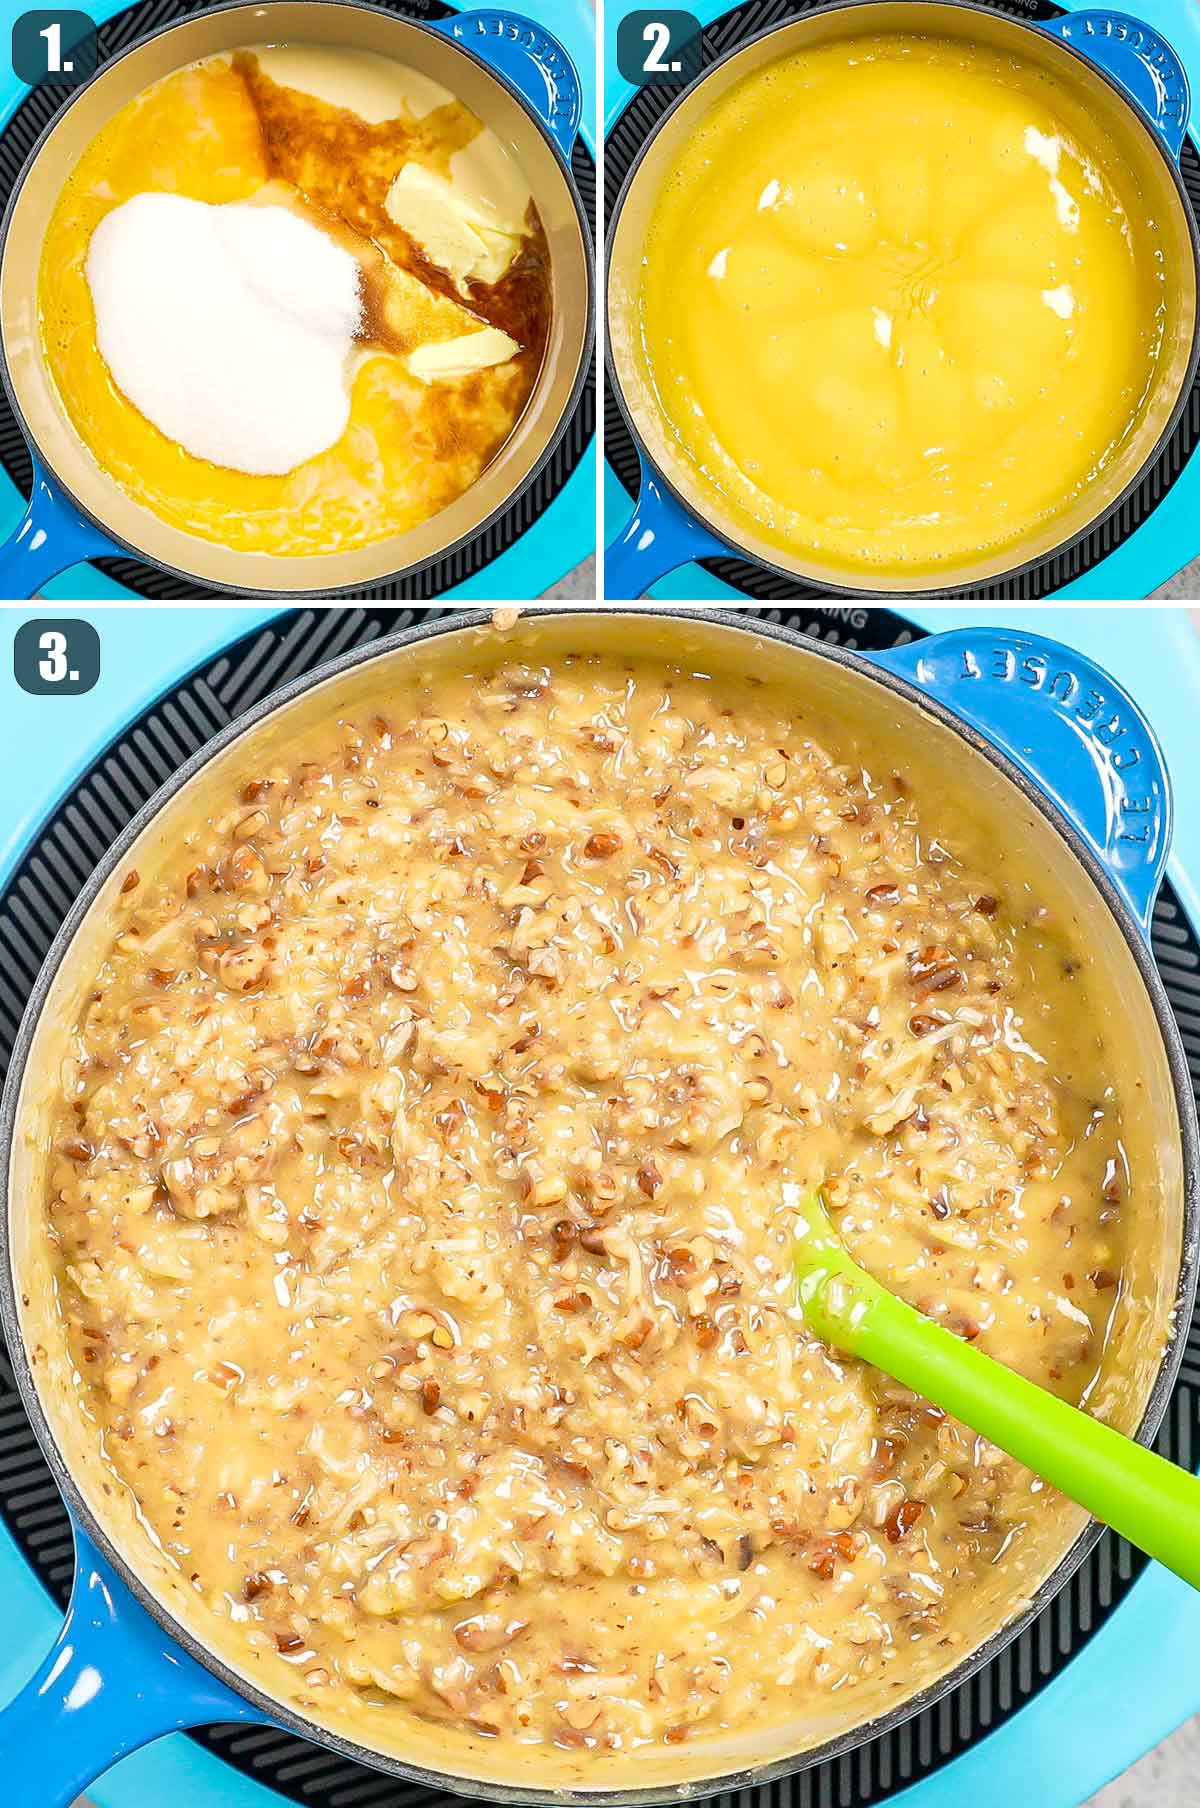 process shots showing how to make coconut pecan topping for german chocolate cake.